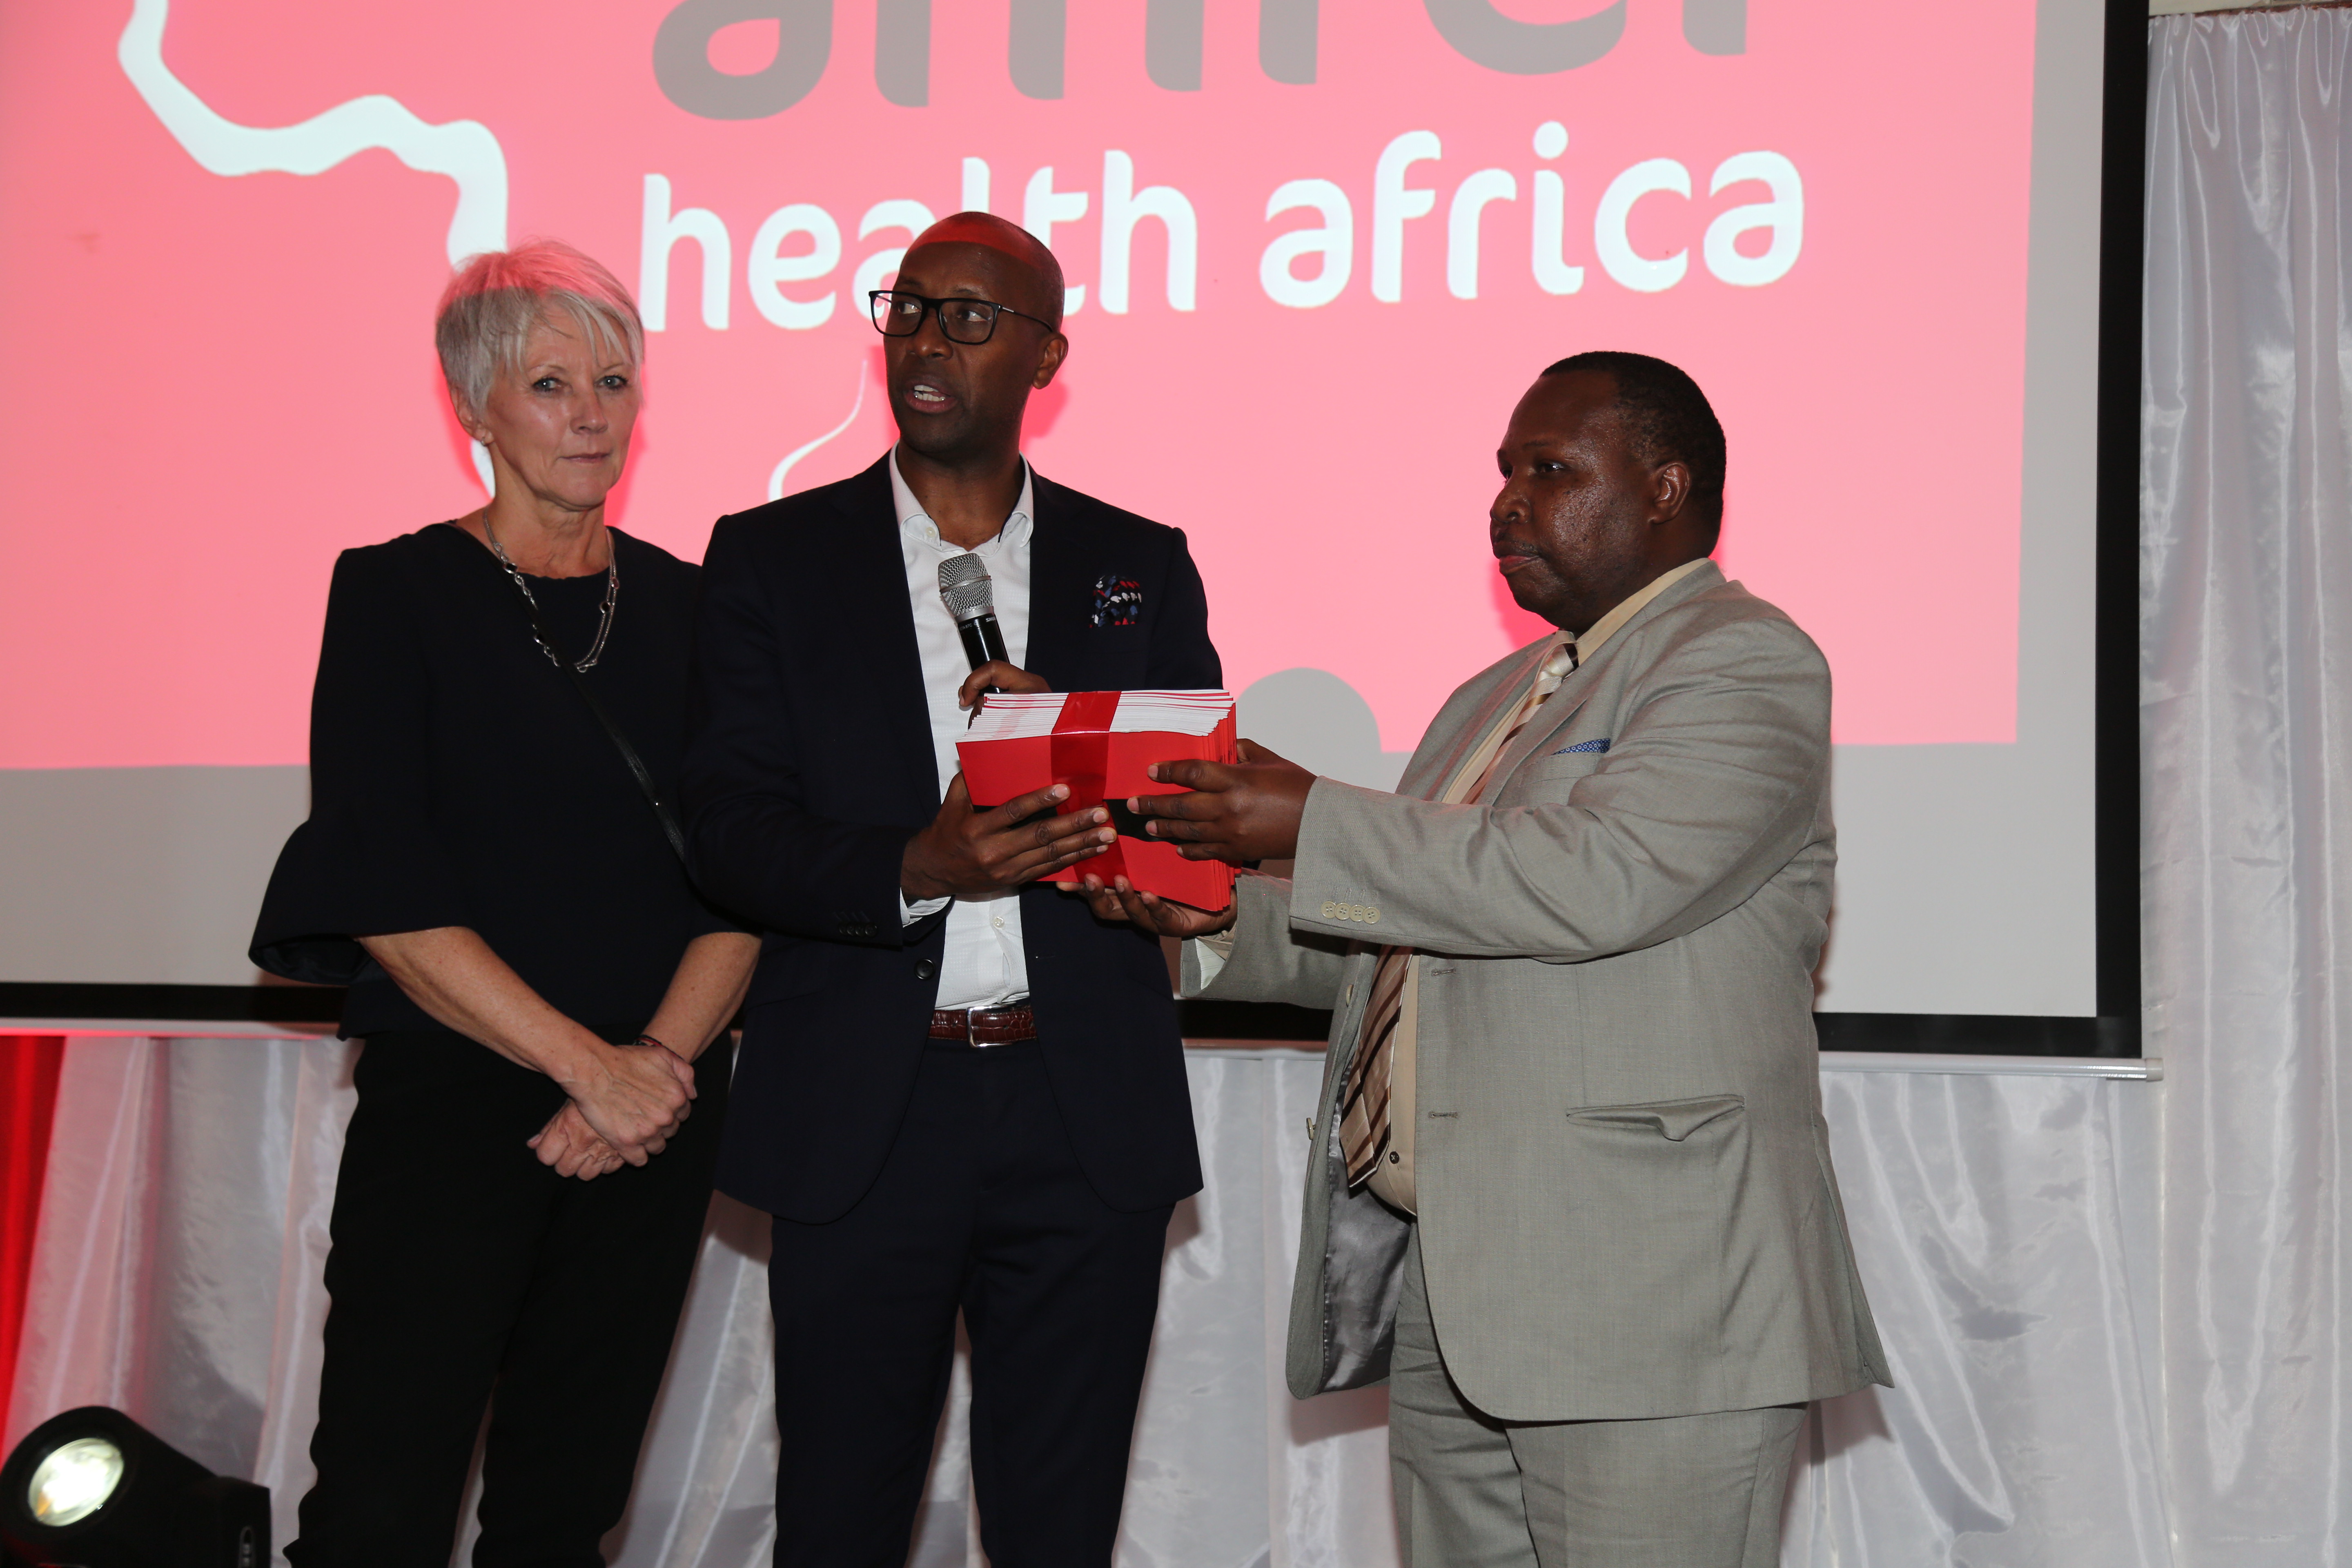 Amref global CEO Dr Gitahi Githinji (middle), hand over the strategy to Head of Directorate of UHC and Health Financing in the Ministry of Health Dr David Kariuki (right) as Amref International Board Vice Chair Mary Anne Mackenzie looks on .